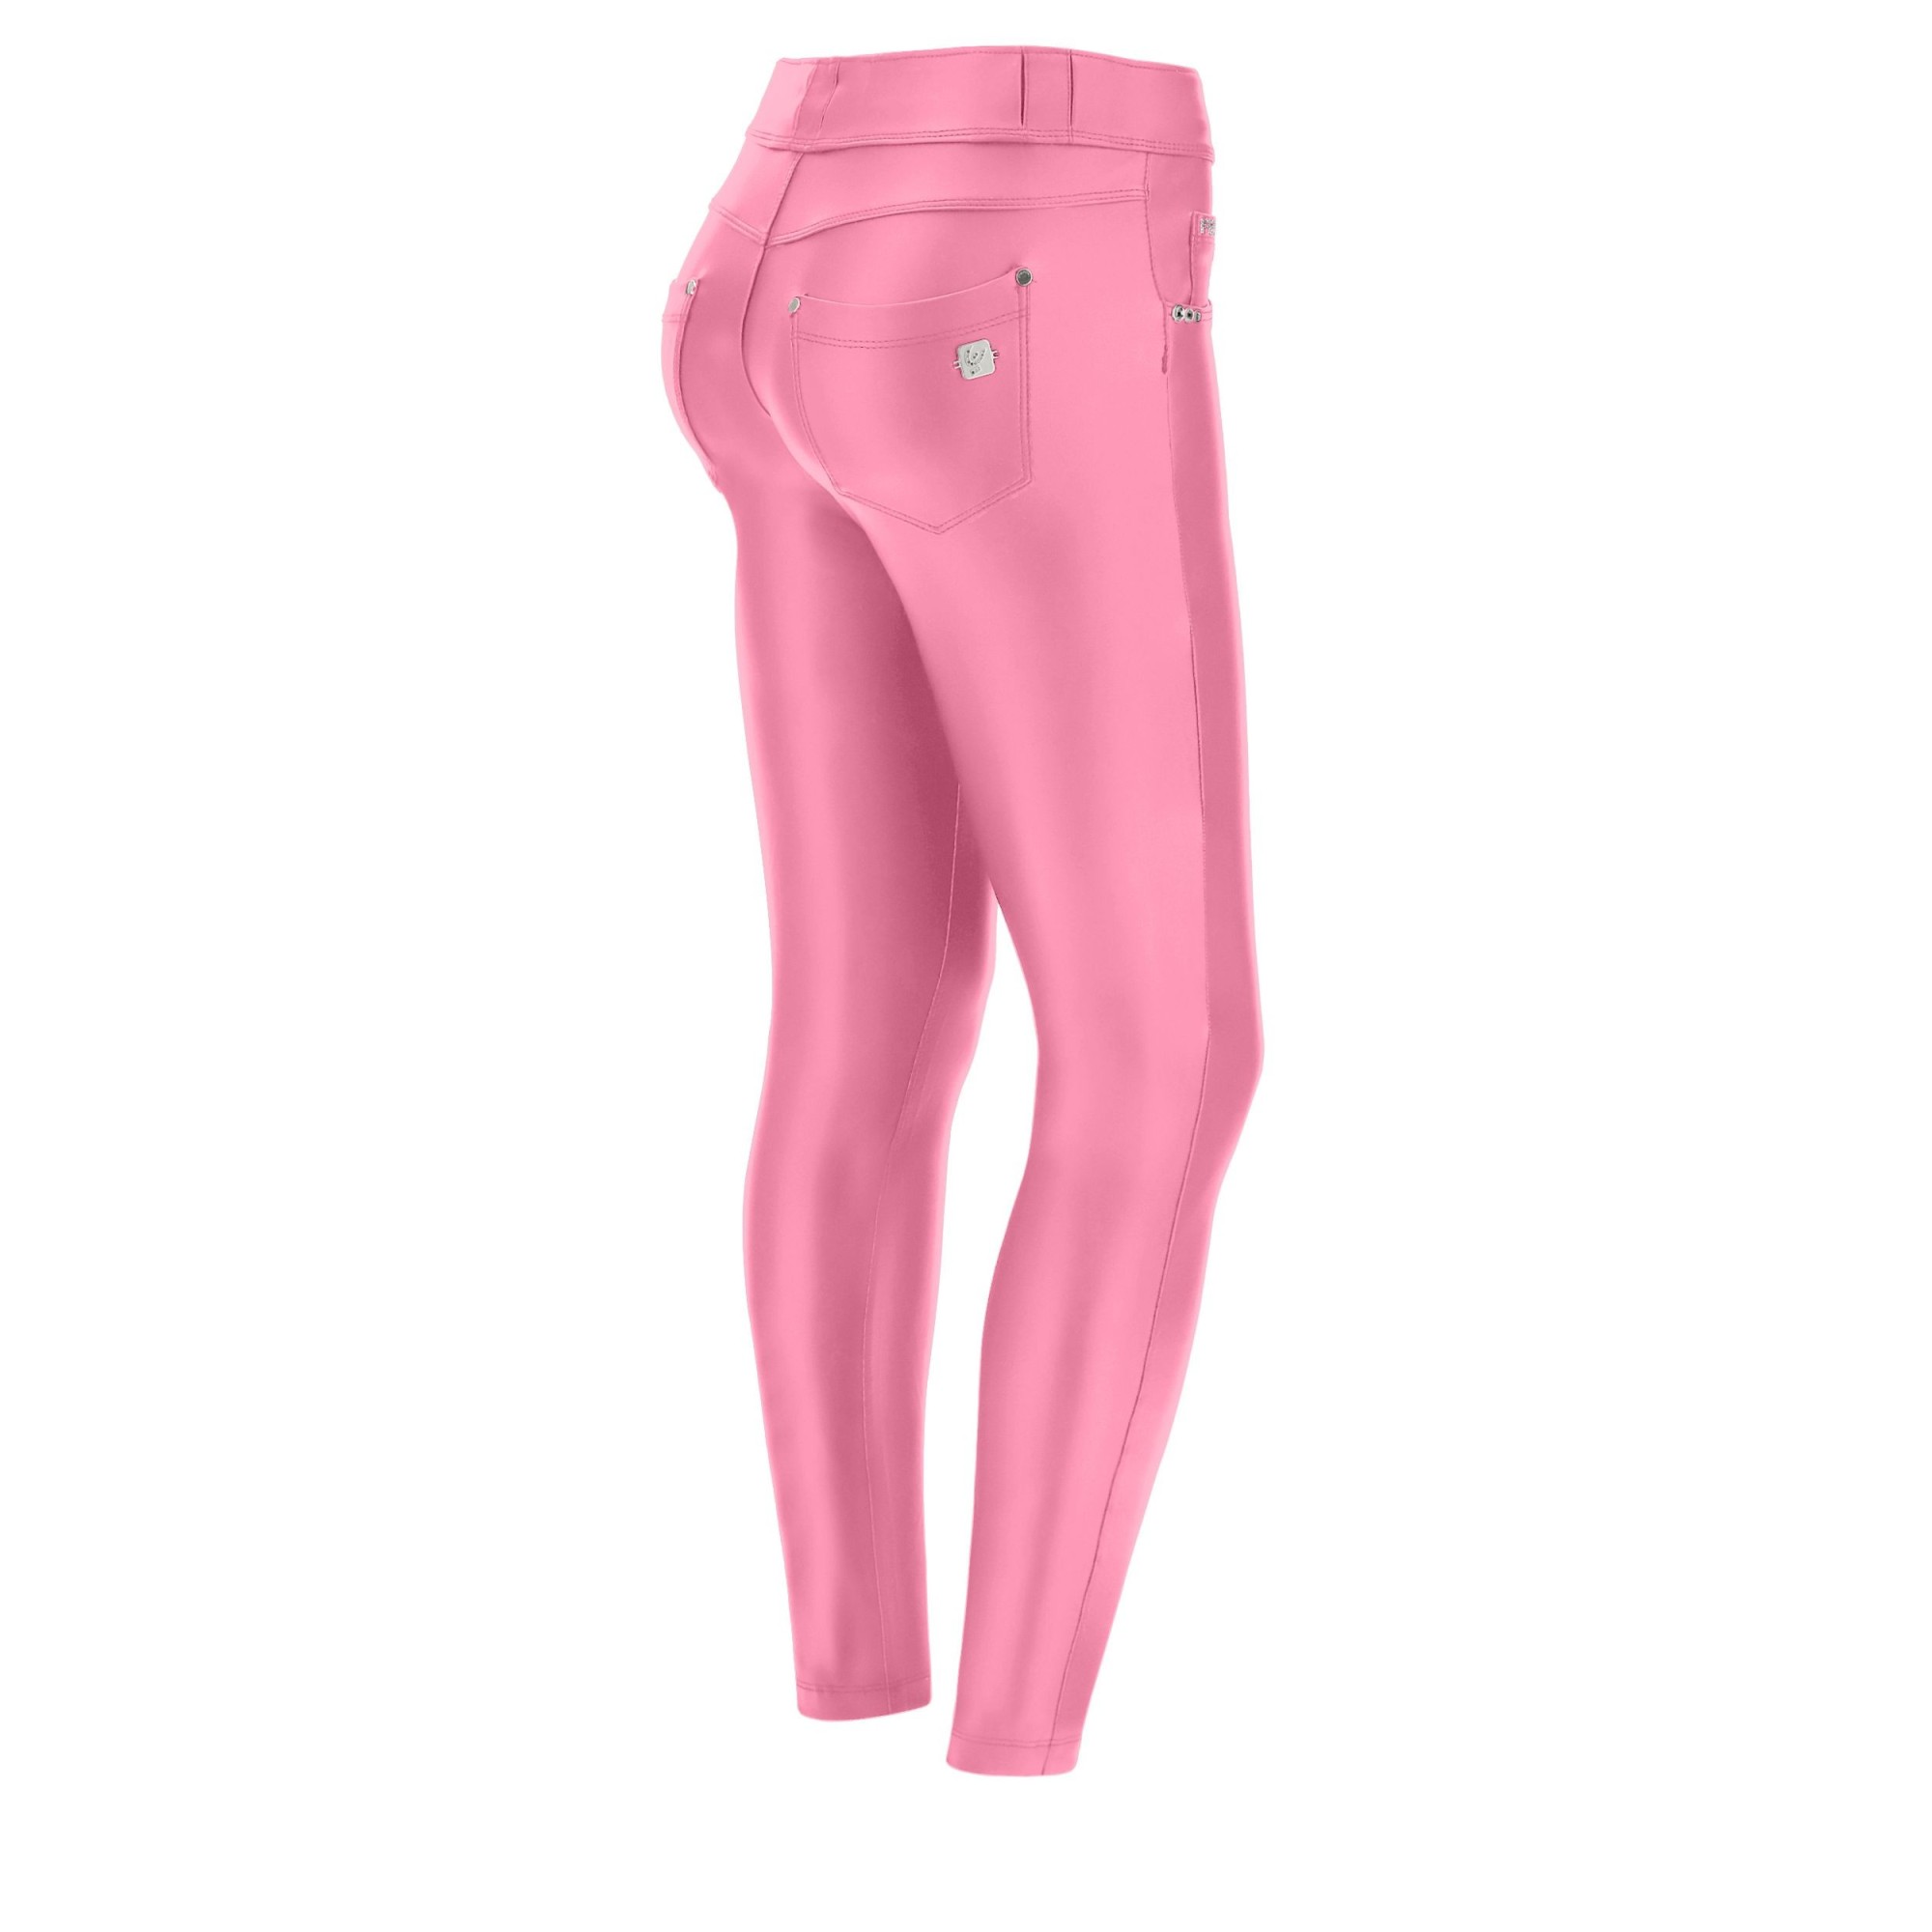 Freddy N.O.W® Ecoleather Pants - 7/8 Mid Waist Super Skinny - P123 - Pink Cosmos